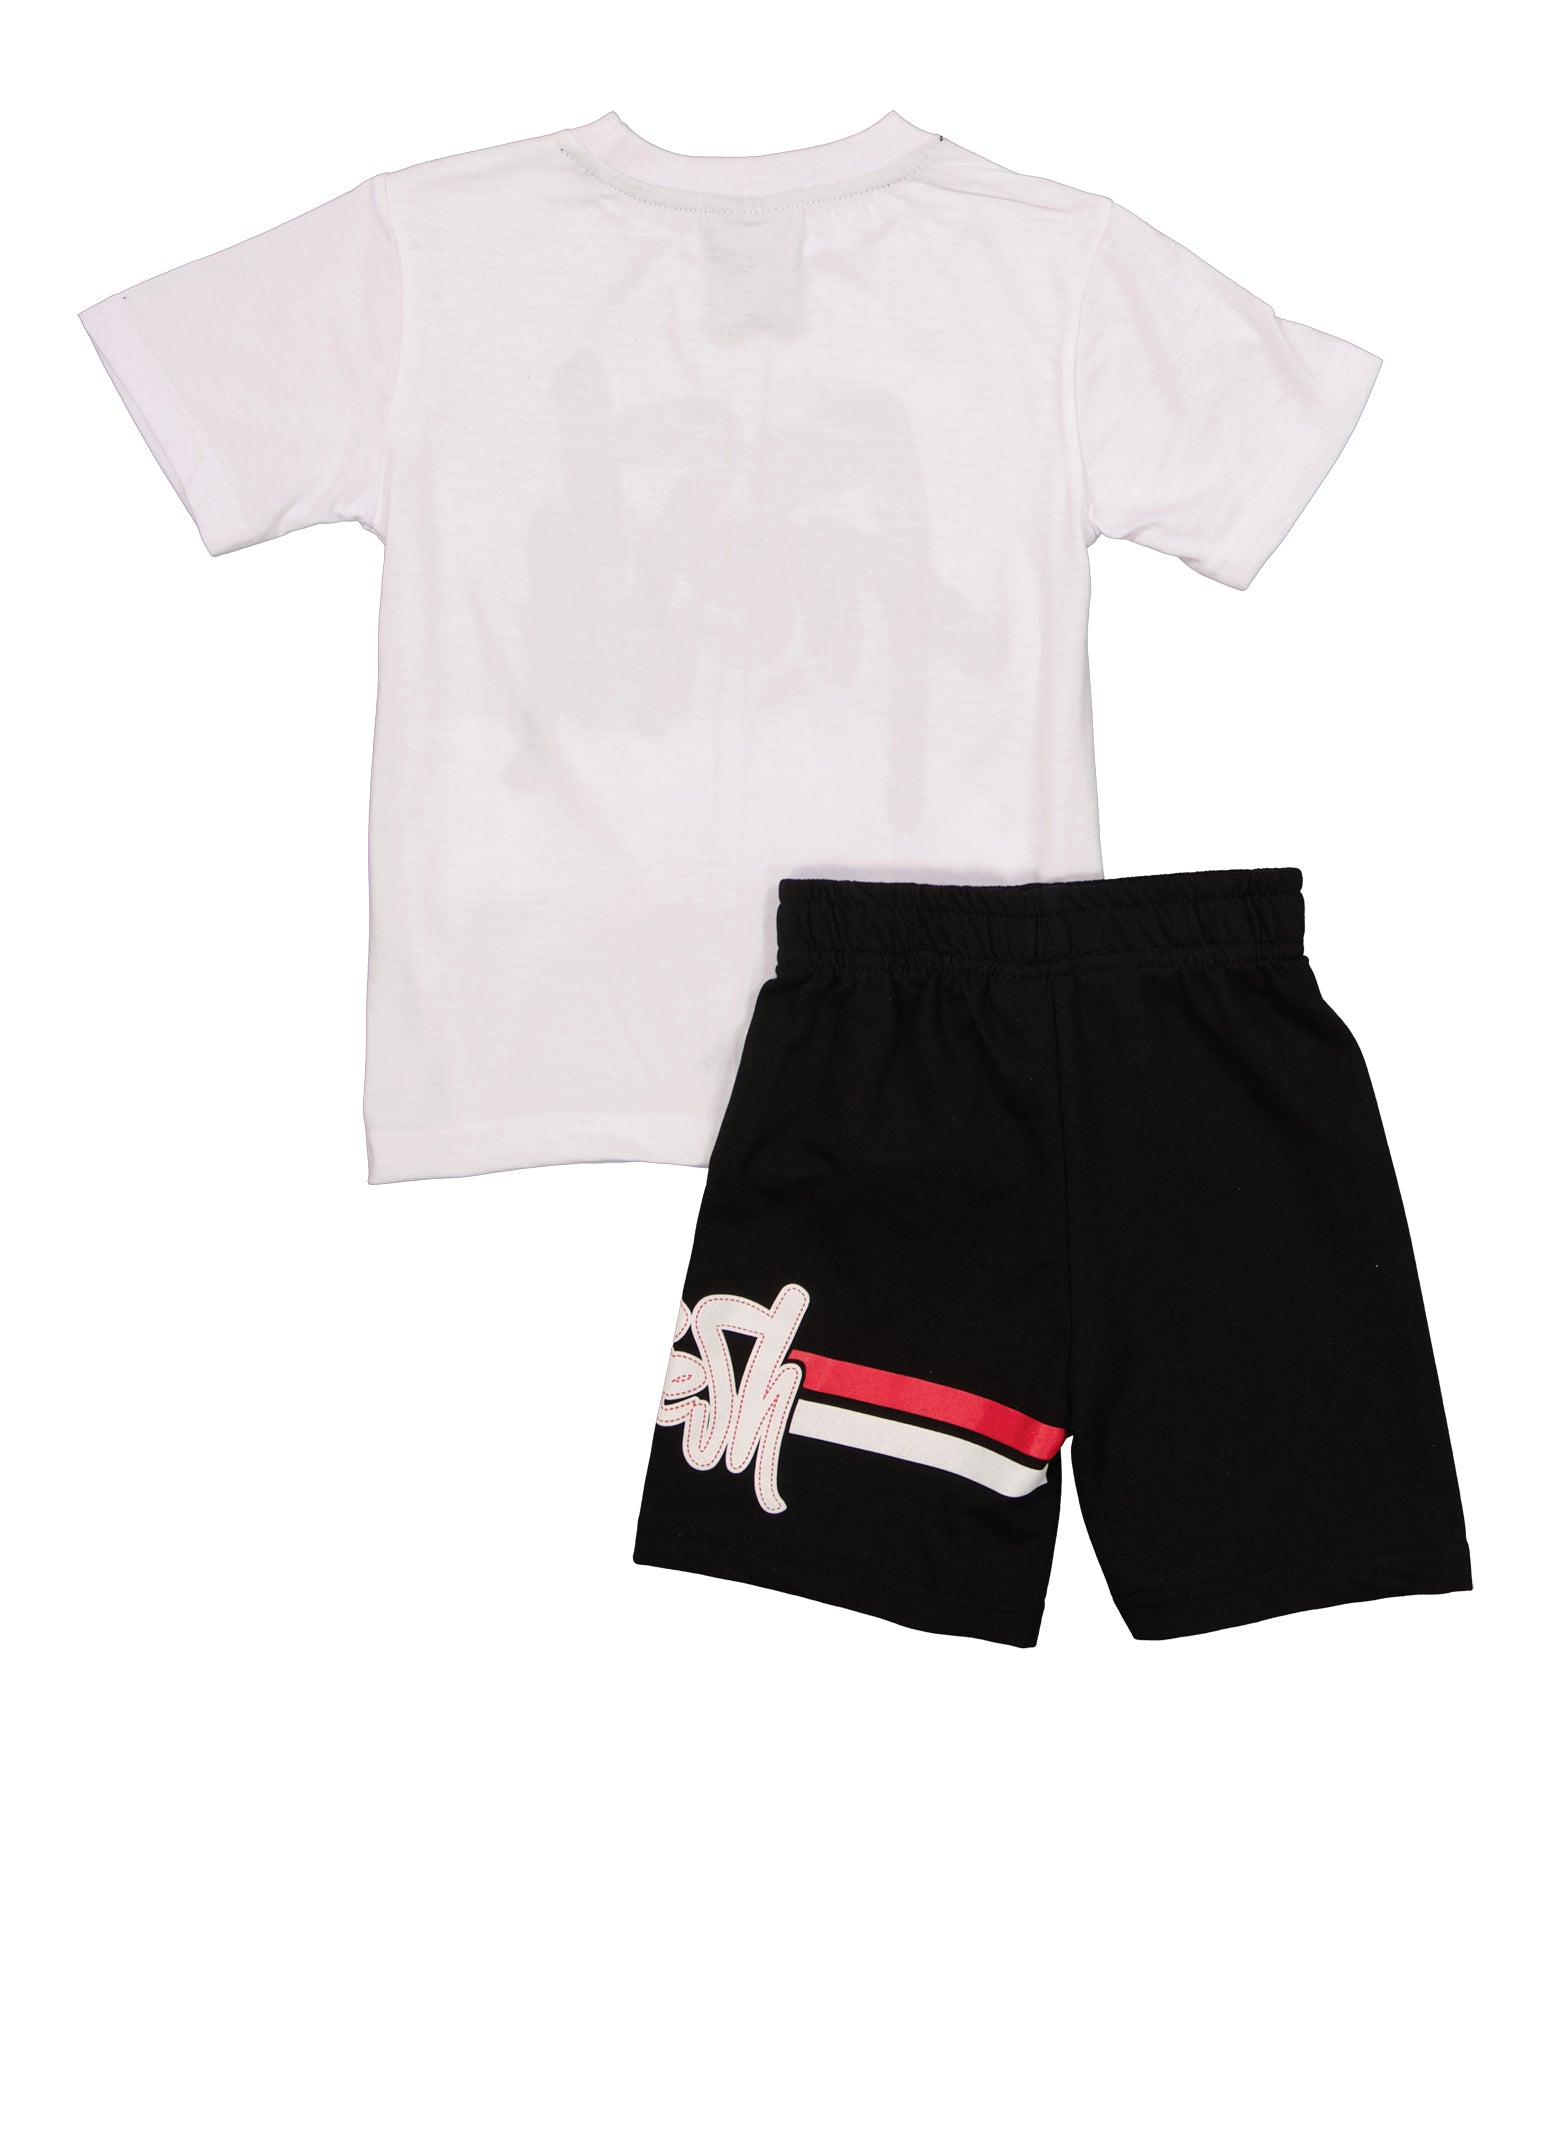 Little Boys So Fresh So Cool Graphic Tee and Shorts